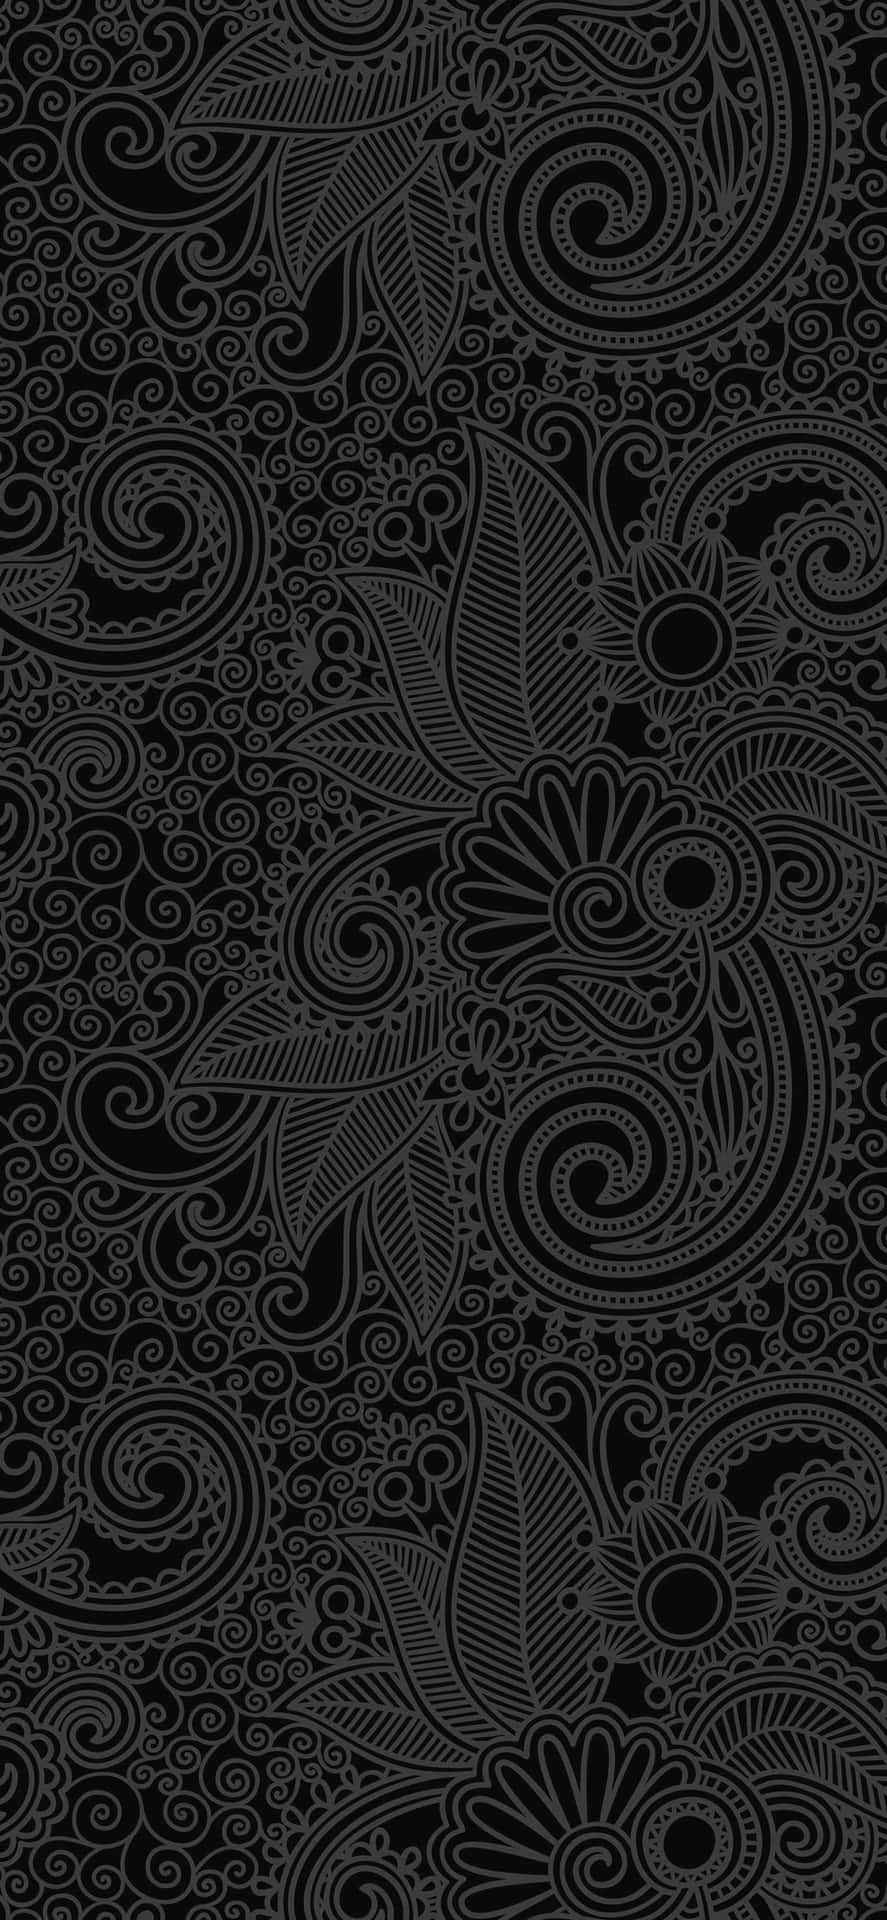 A Black And White Paisley Pattern Wallpaper